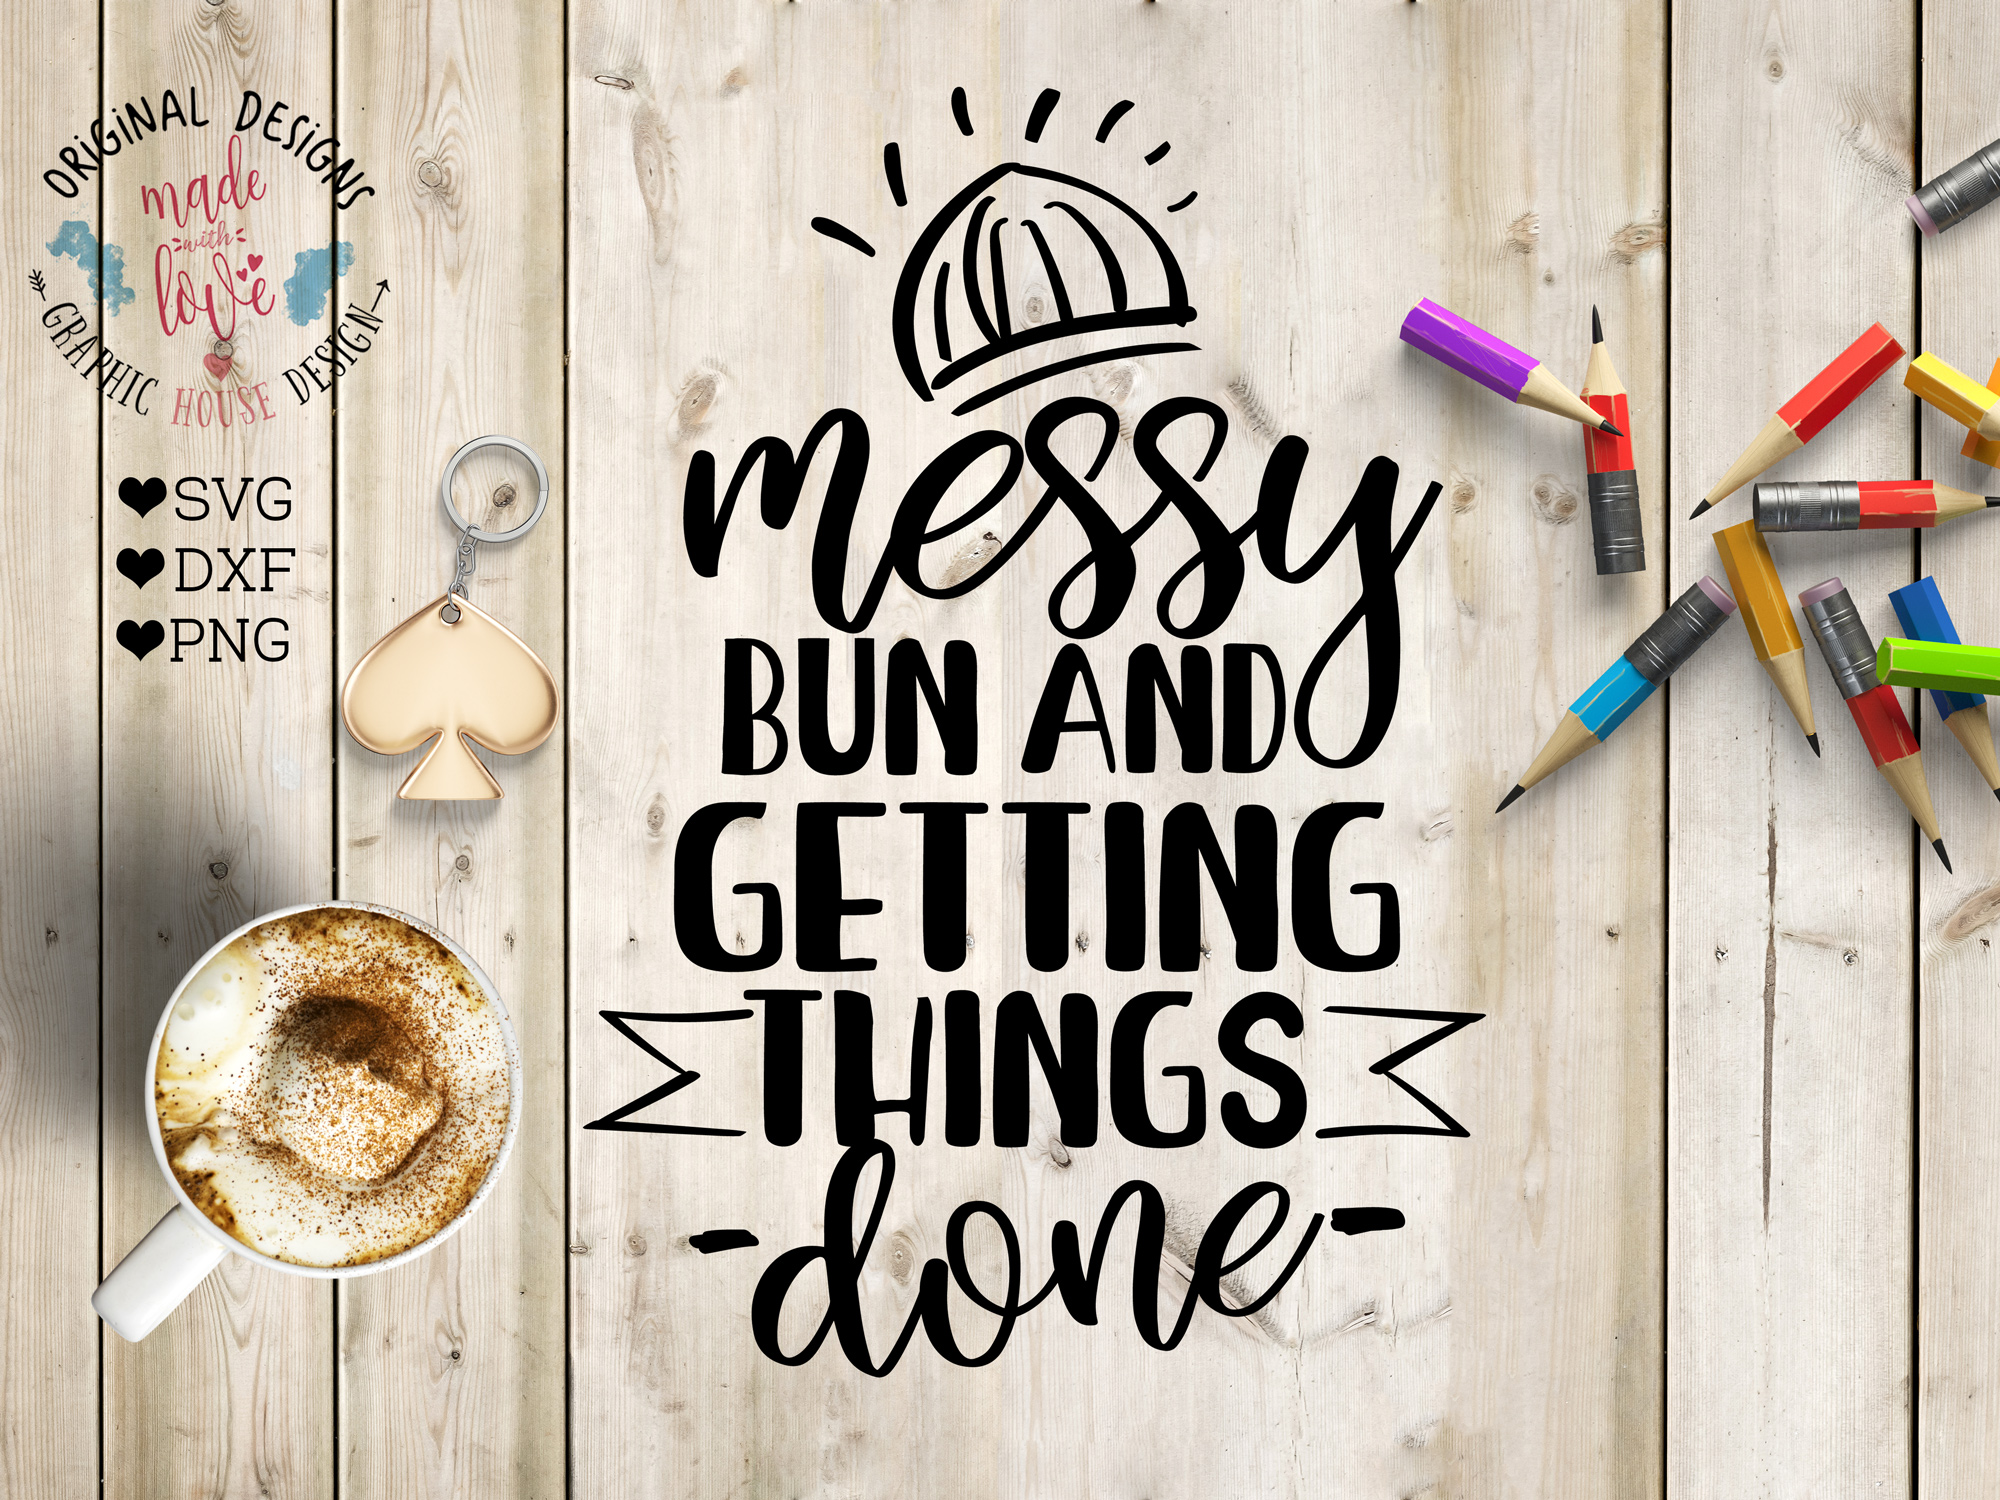 Messy Bun and Getting Things Done Cut File SVG, DXF, PNG (29138) | SVGs